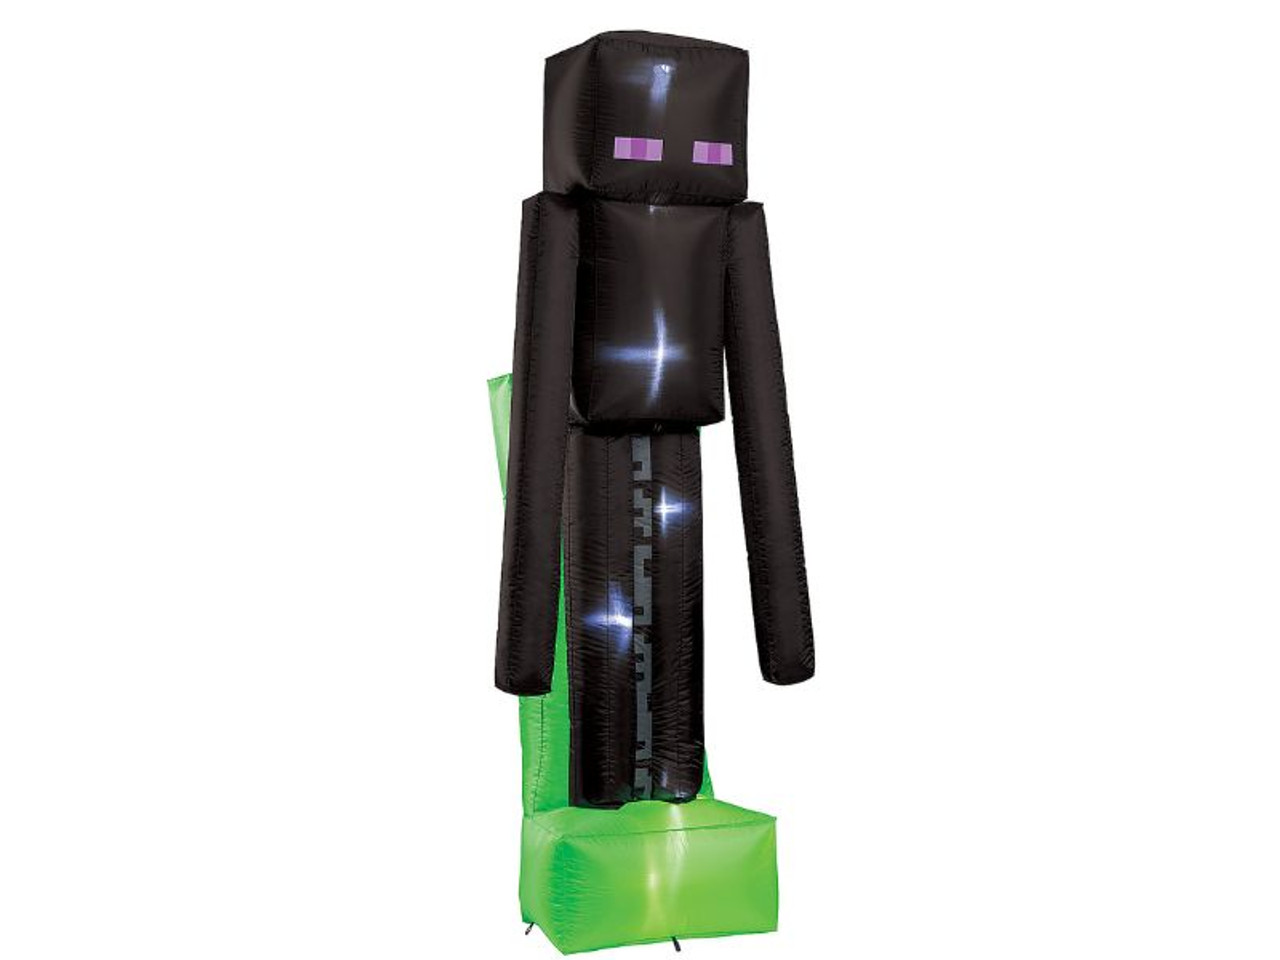 Blowup Inflatable Minecraft Enderman with Built-In LED Lights